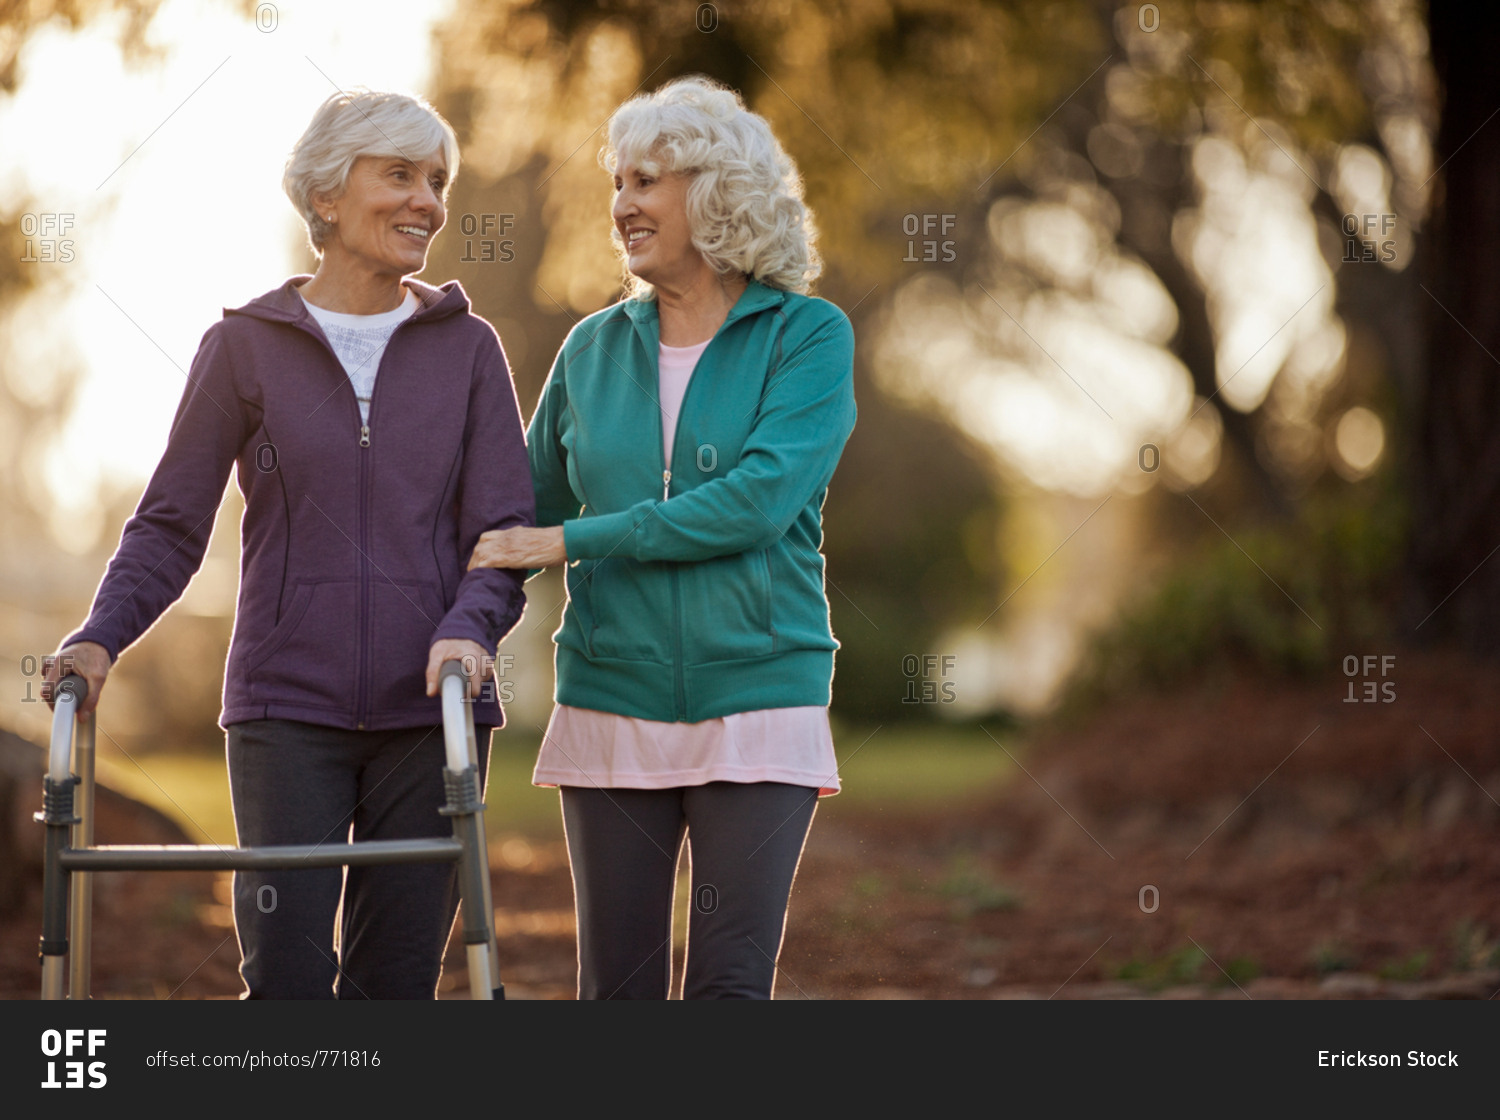 Smiling senior woman helping her friend to walk with a walking aid through a park.